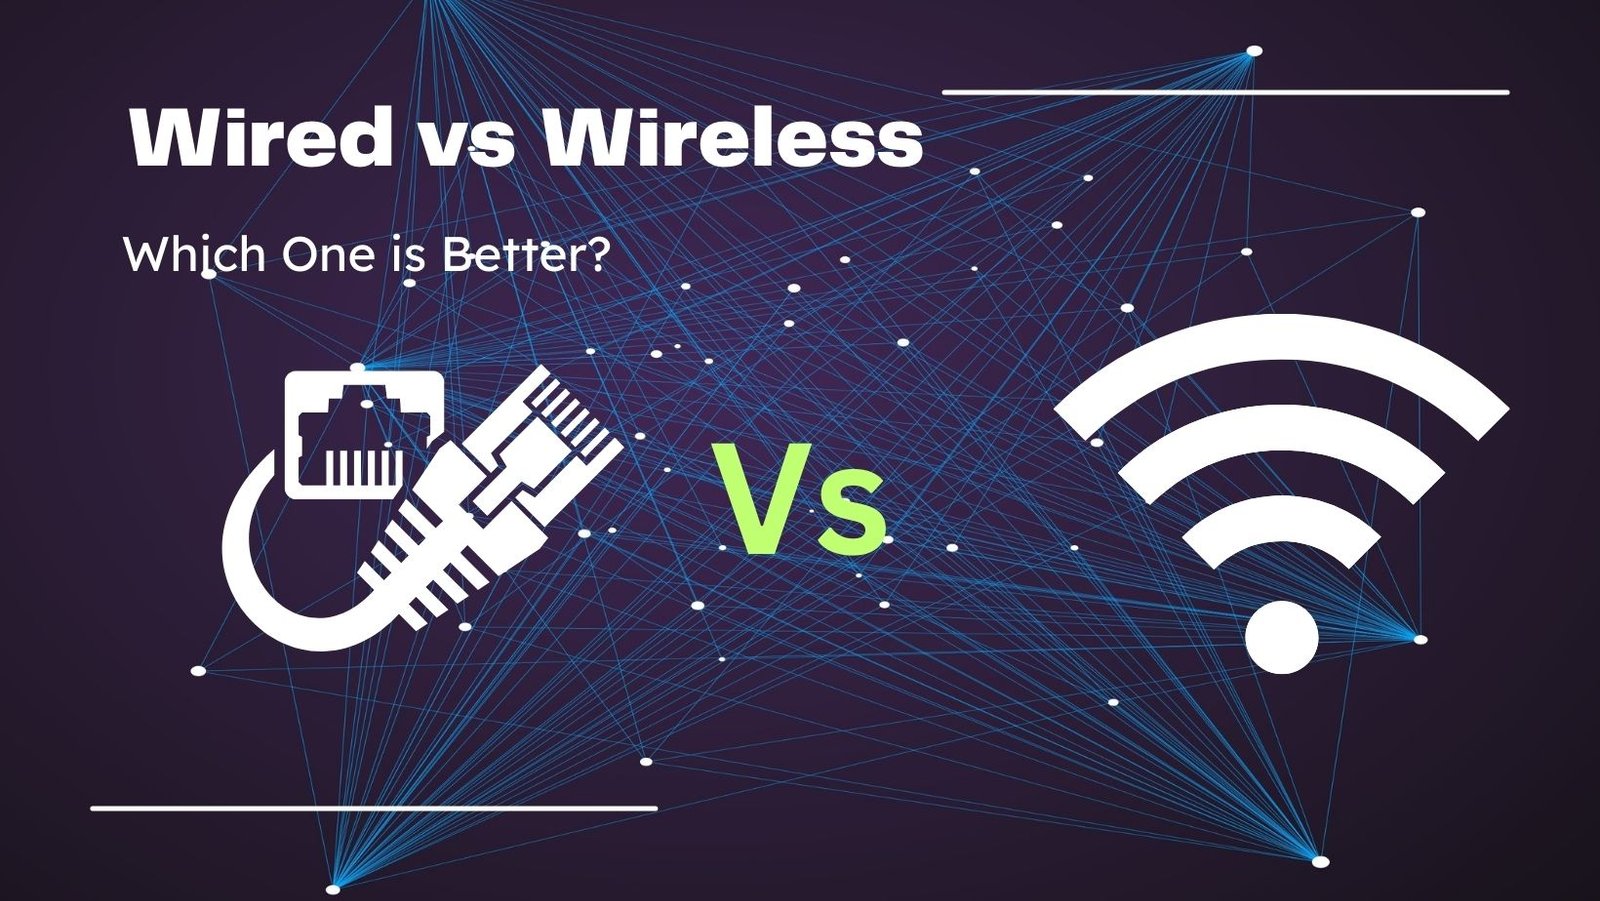 Is it Better to have a Wired Connection than a Wireless one?